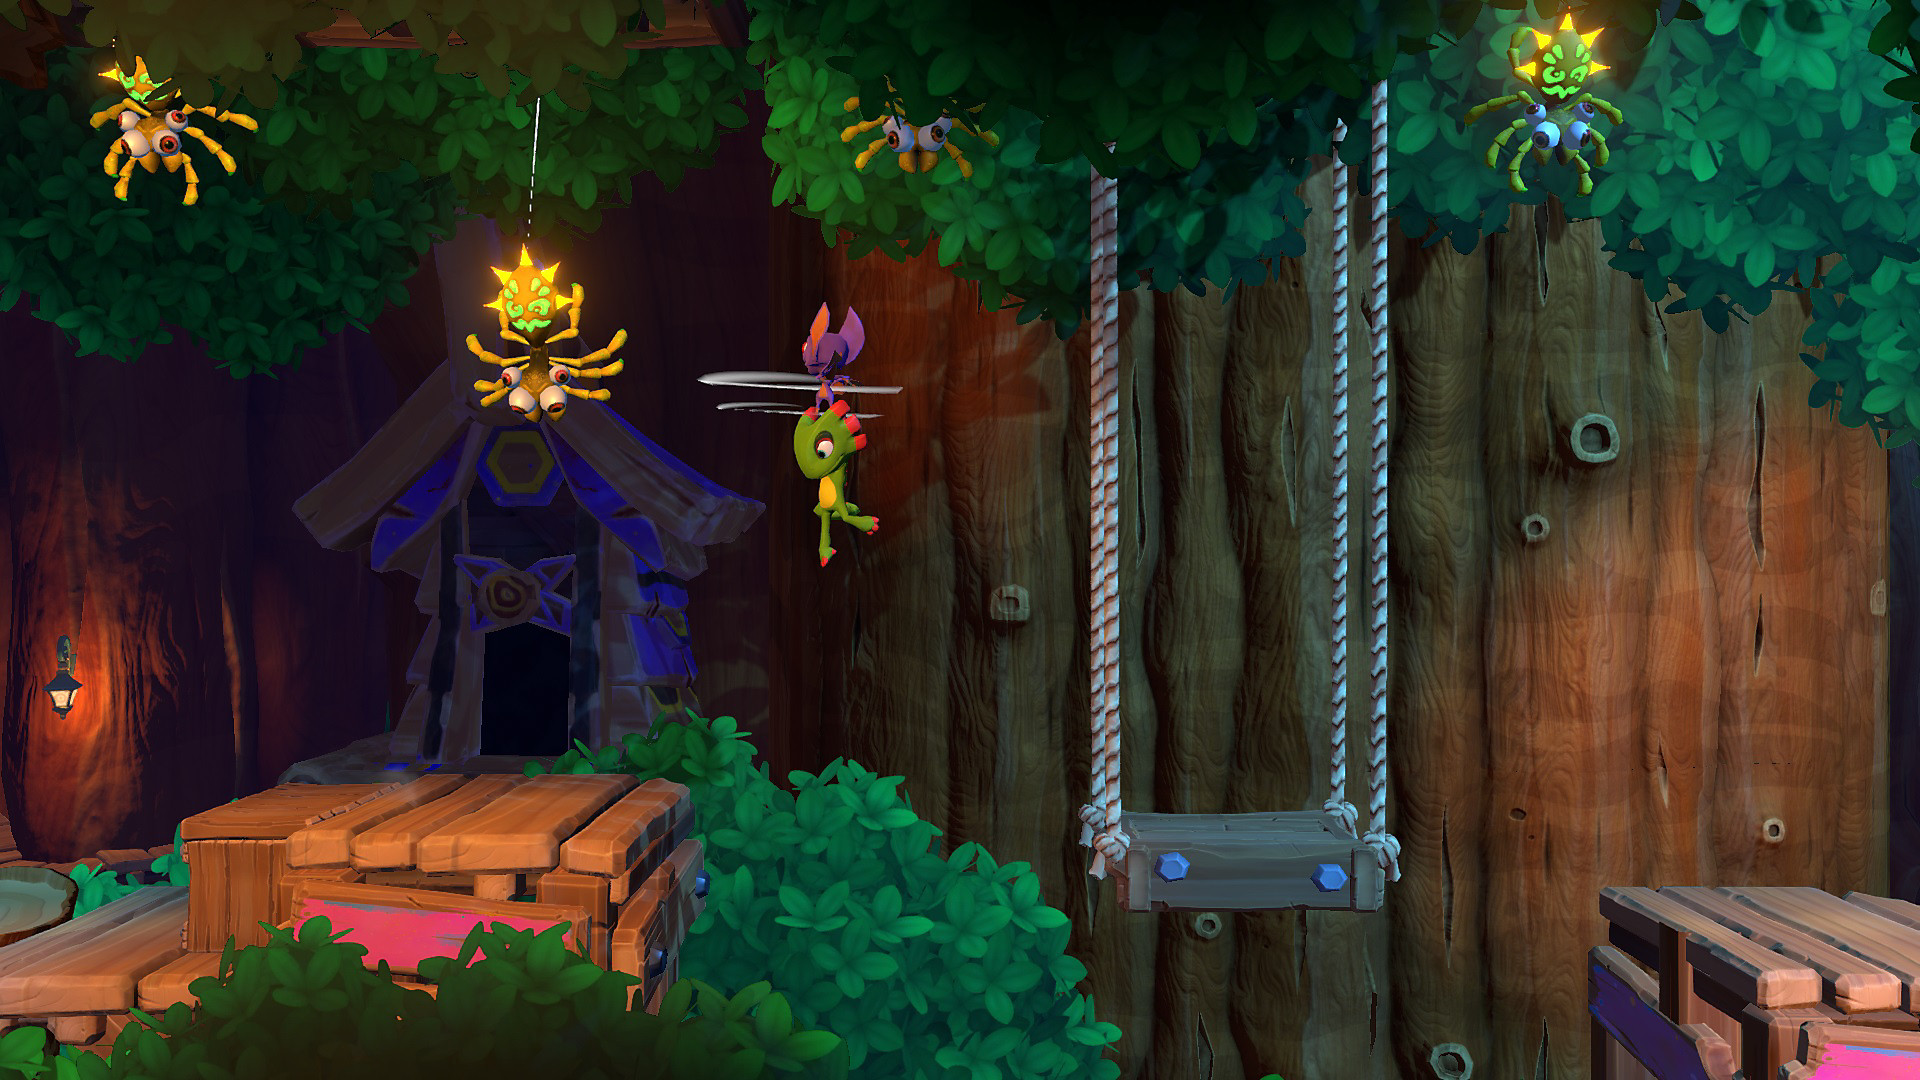 yooka-laylee-and-the-impossible-lair-screenshot-10-ps4-us-08october2019